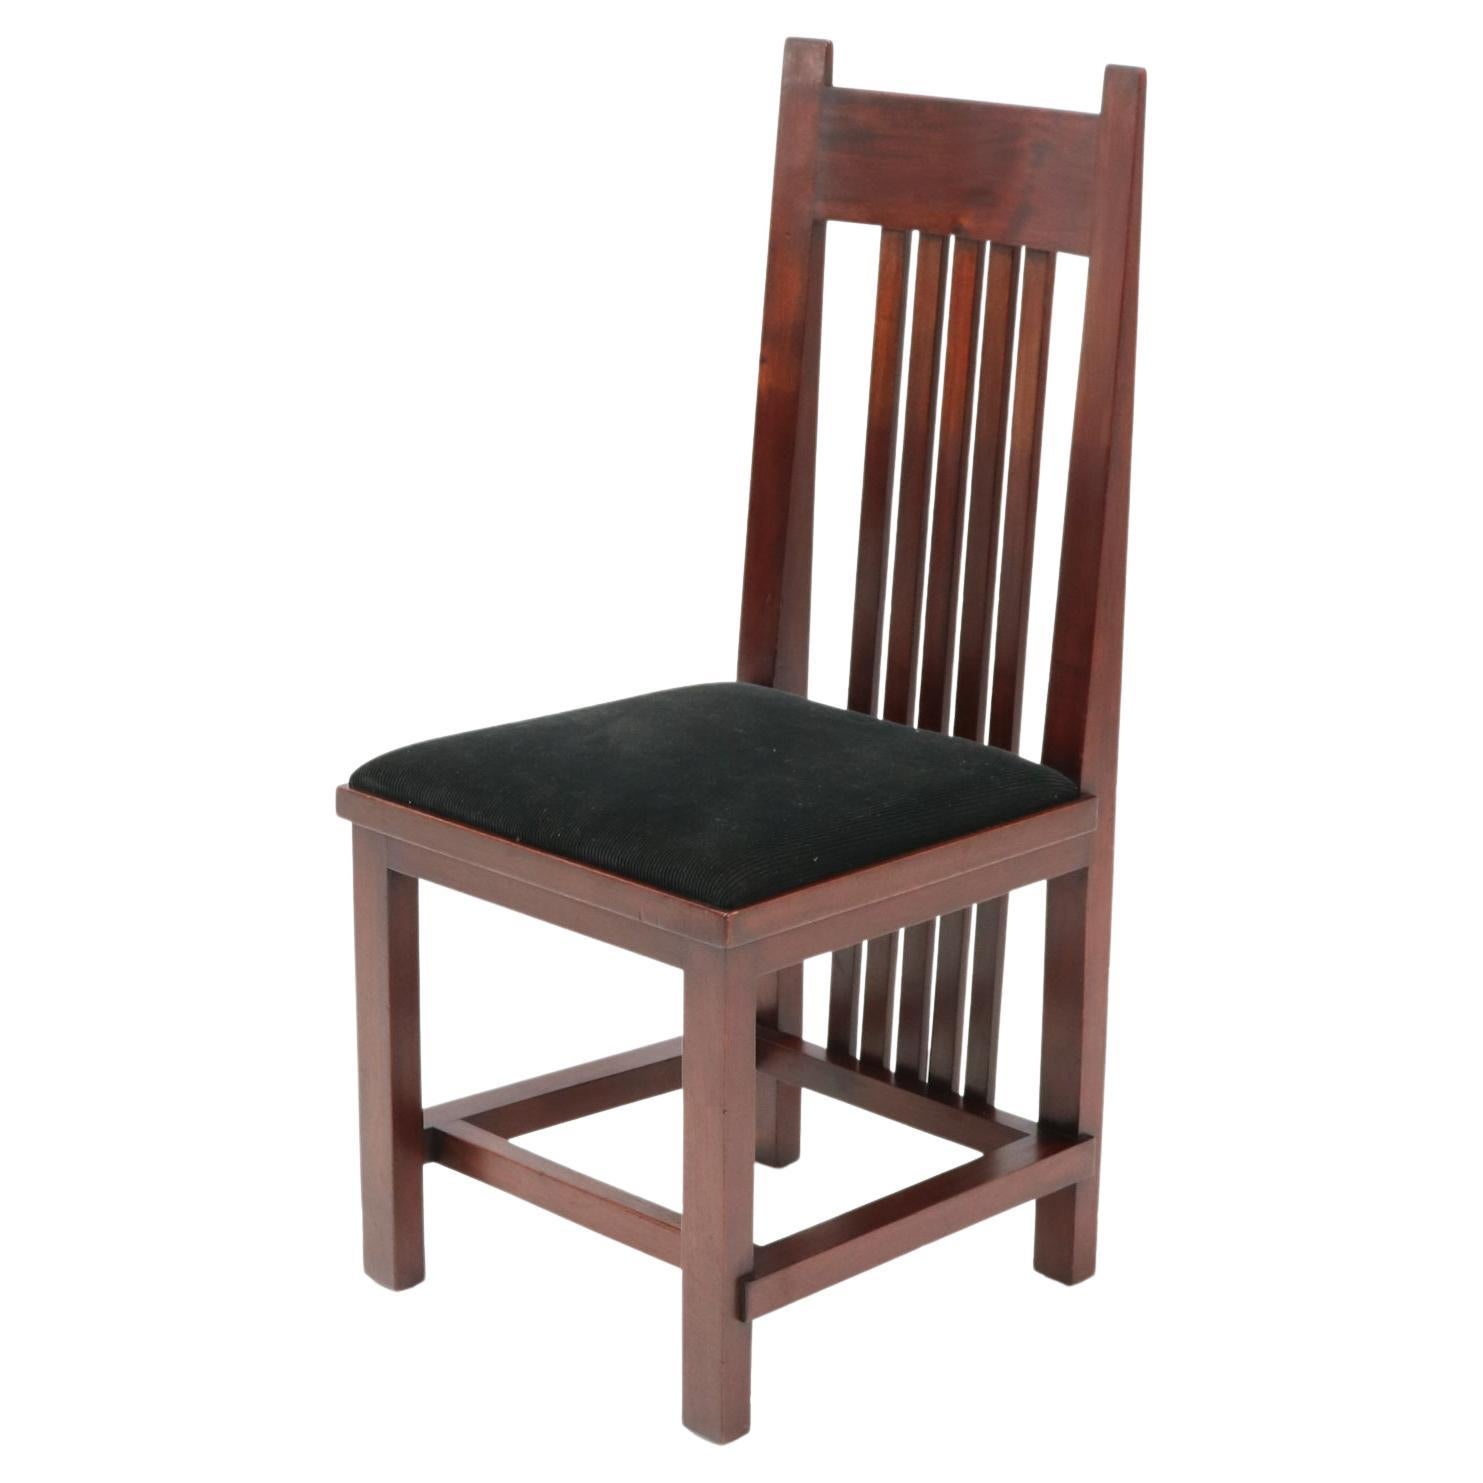 Mahogany Art Deco Modernist High Back Chair by Hendrik Wouda for Pander, 1924 For Sale